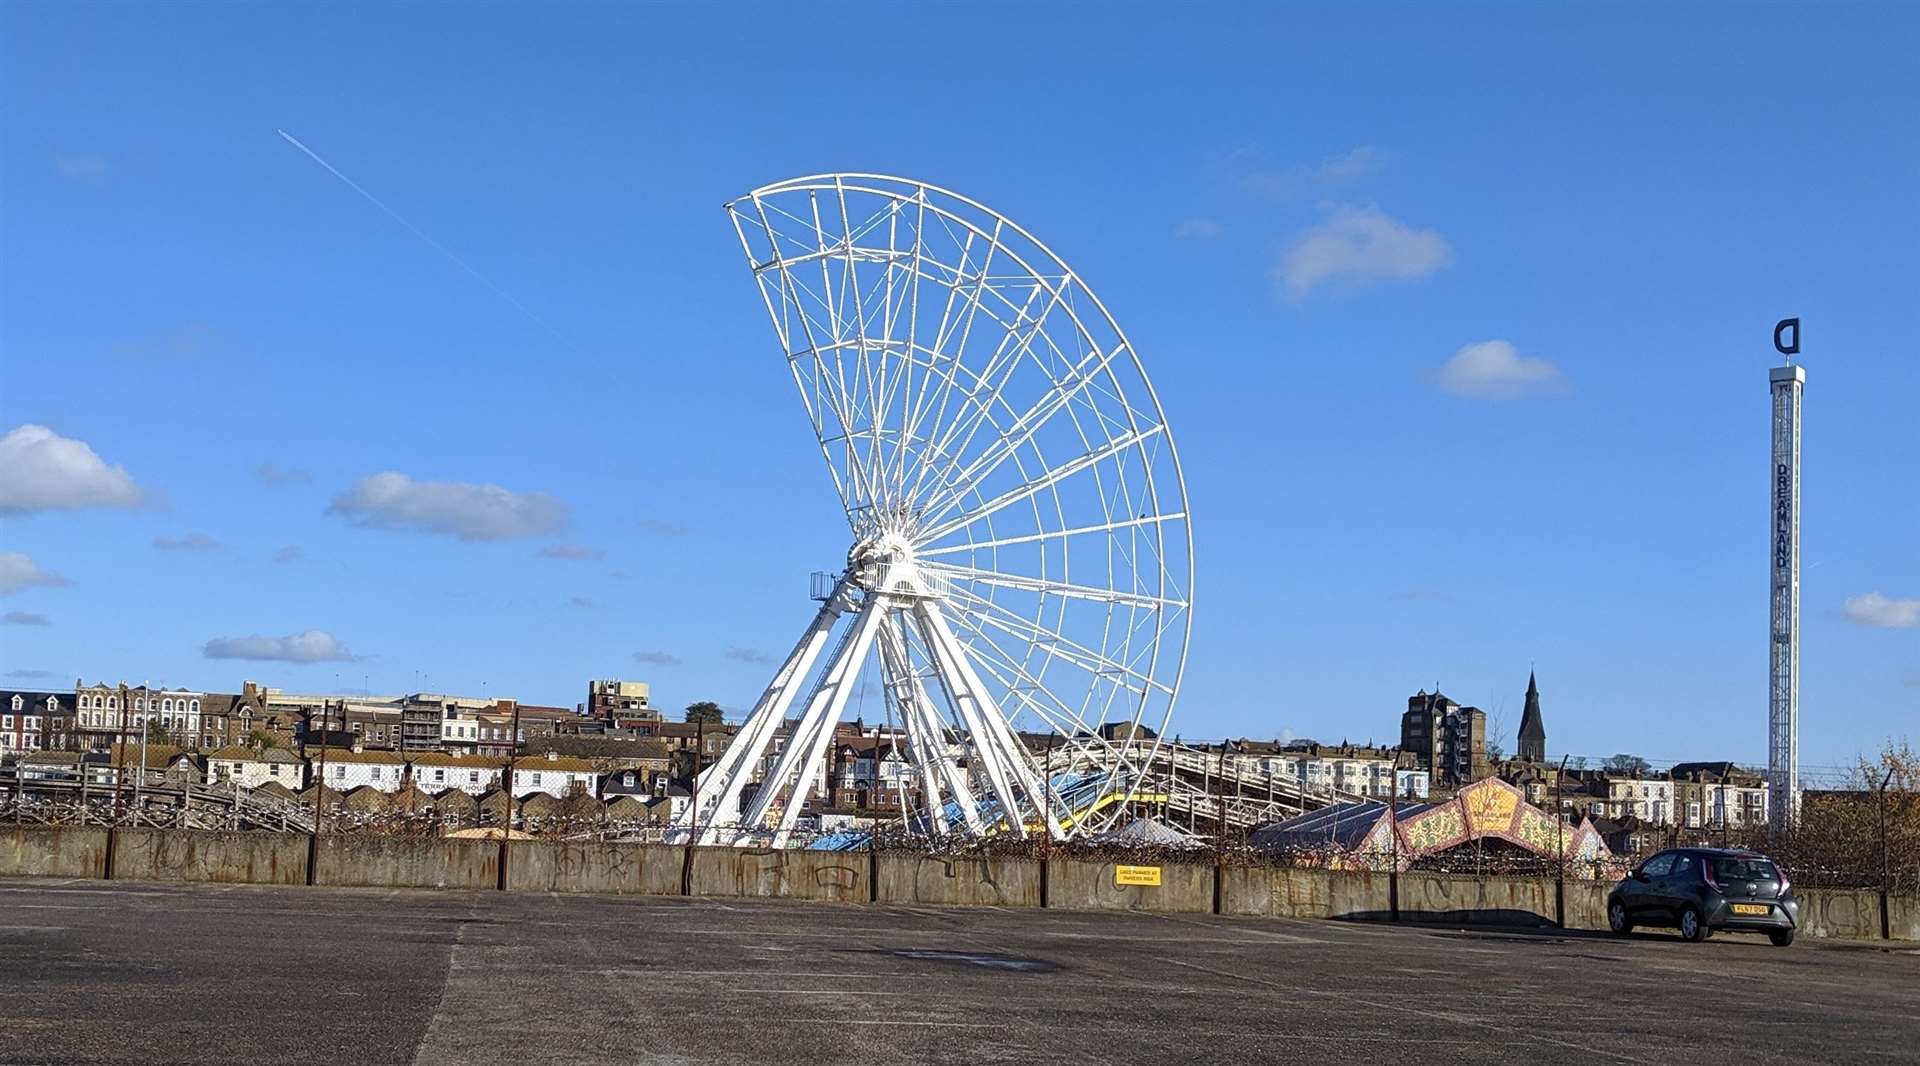 Dreamland's Big Wheel being dismantled in 2019 for maintenance. Picture: Rob Yates